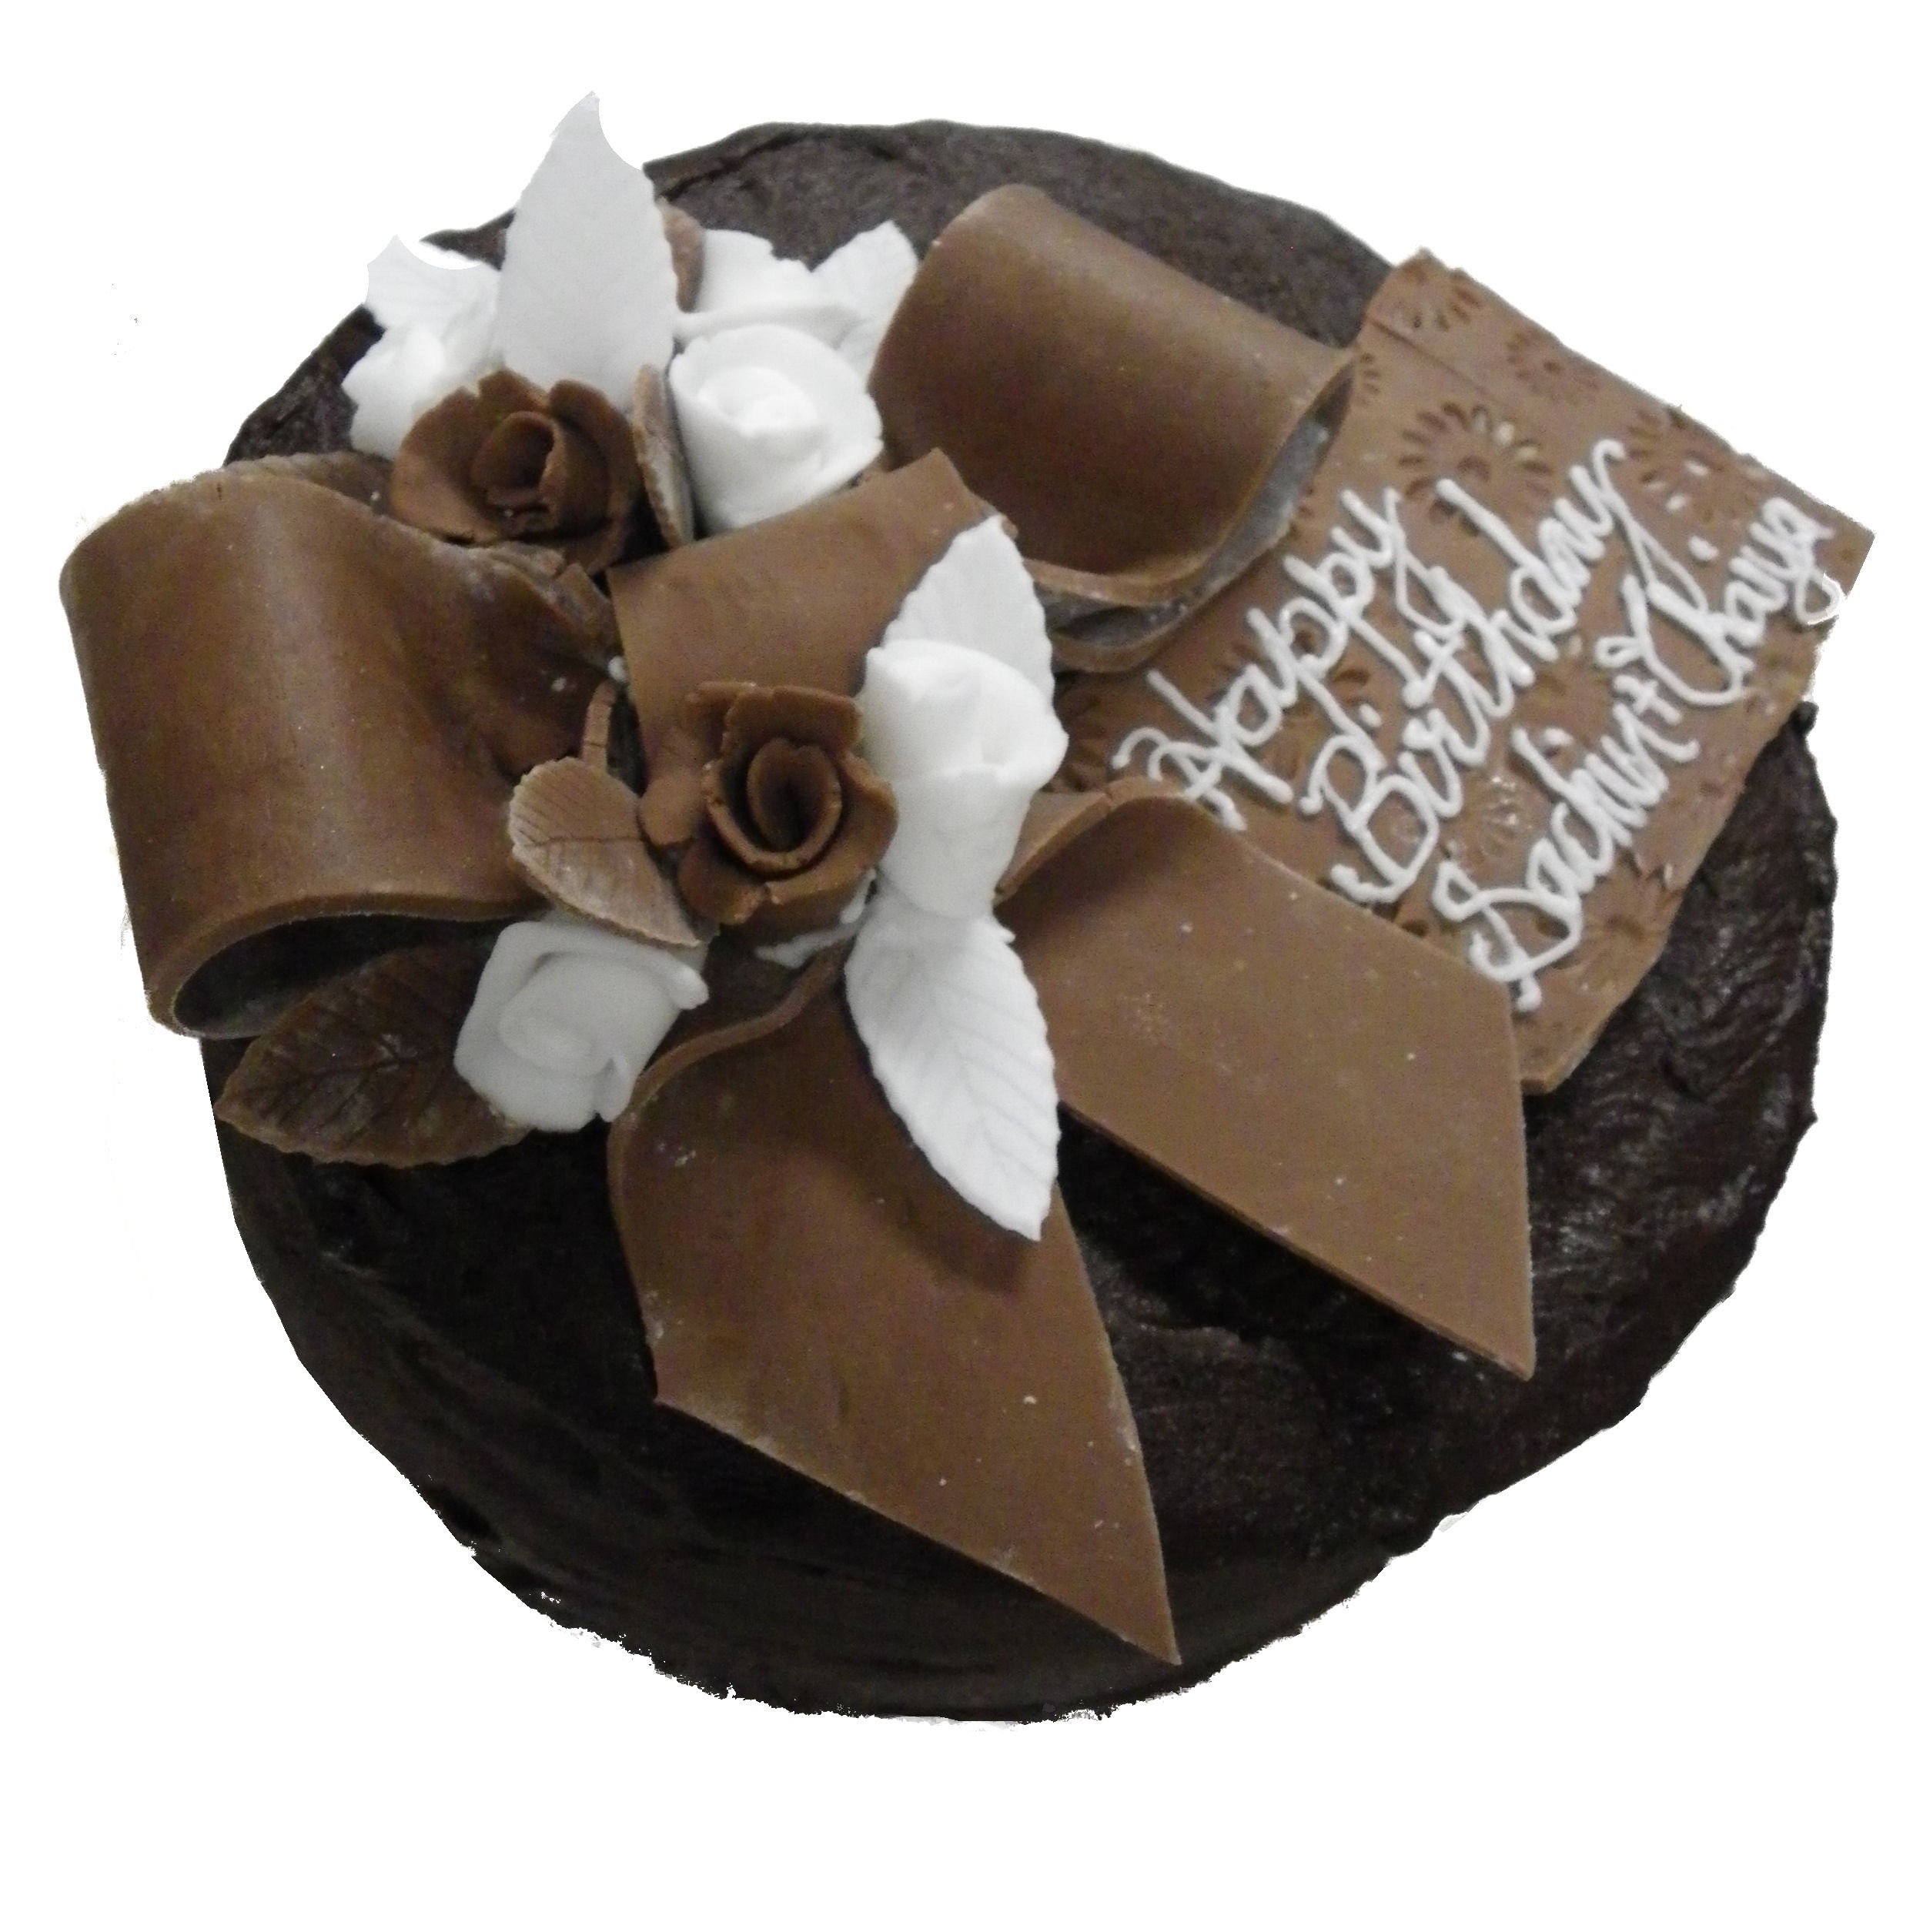 Double layer chocolate Vegan cake (*gluten friendly). Please click here for product details.